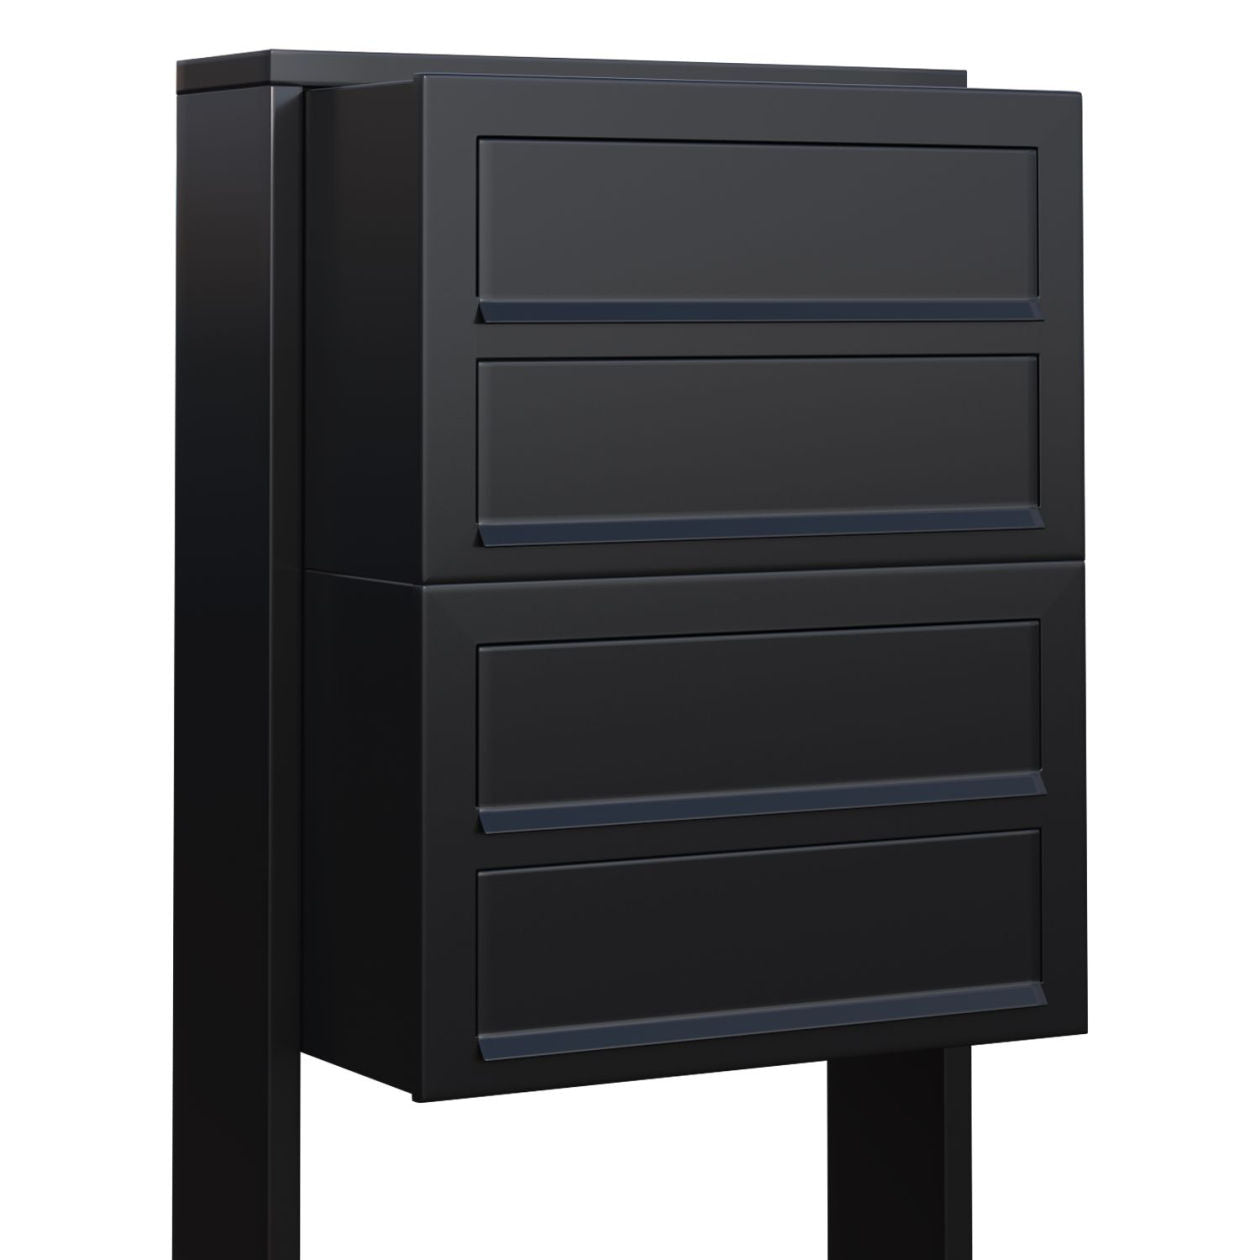 STAND CUBE 4 by Bravios - Modern post-mounted 4-unit black mailbox